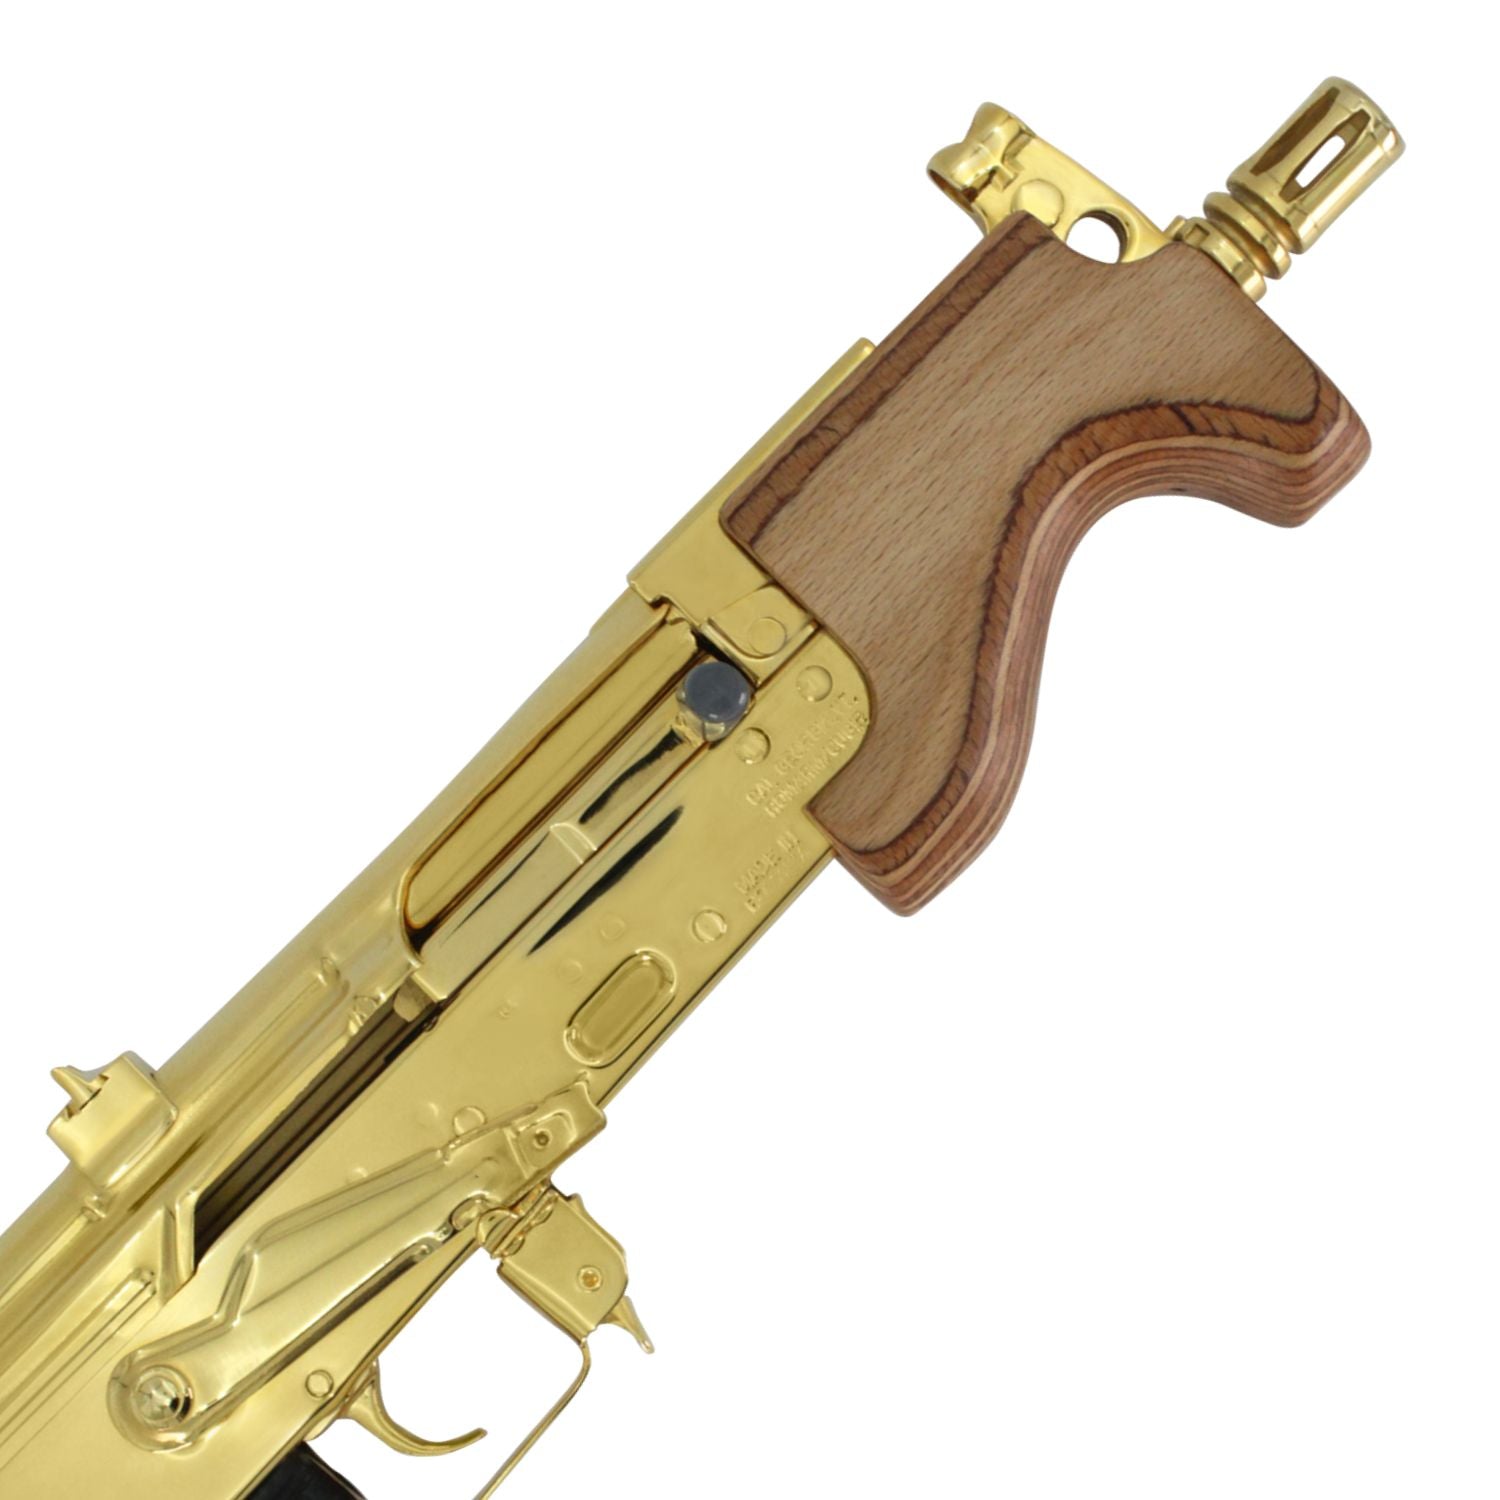 Century Arms Micro Draco, 7.62 x39mm, 24k Gold Plated WITH/Gold plated Drum, SKU: 6717974937702, Gold AK47,  24k Gold AK , Gold Micro Draco